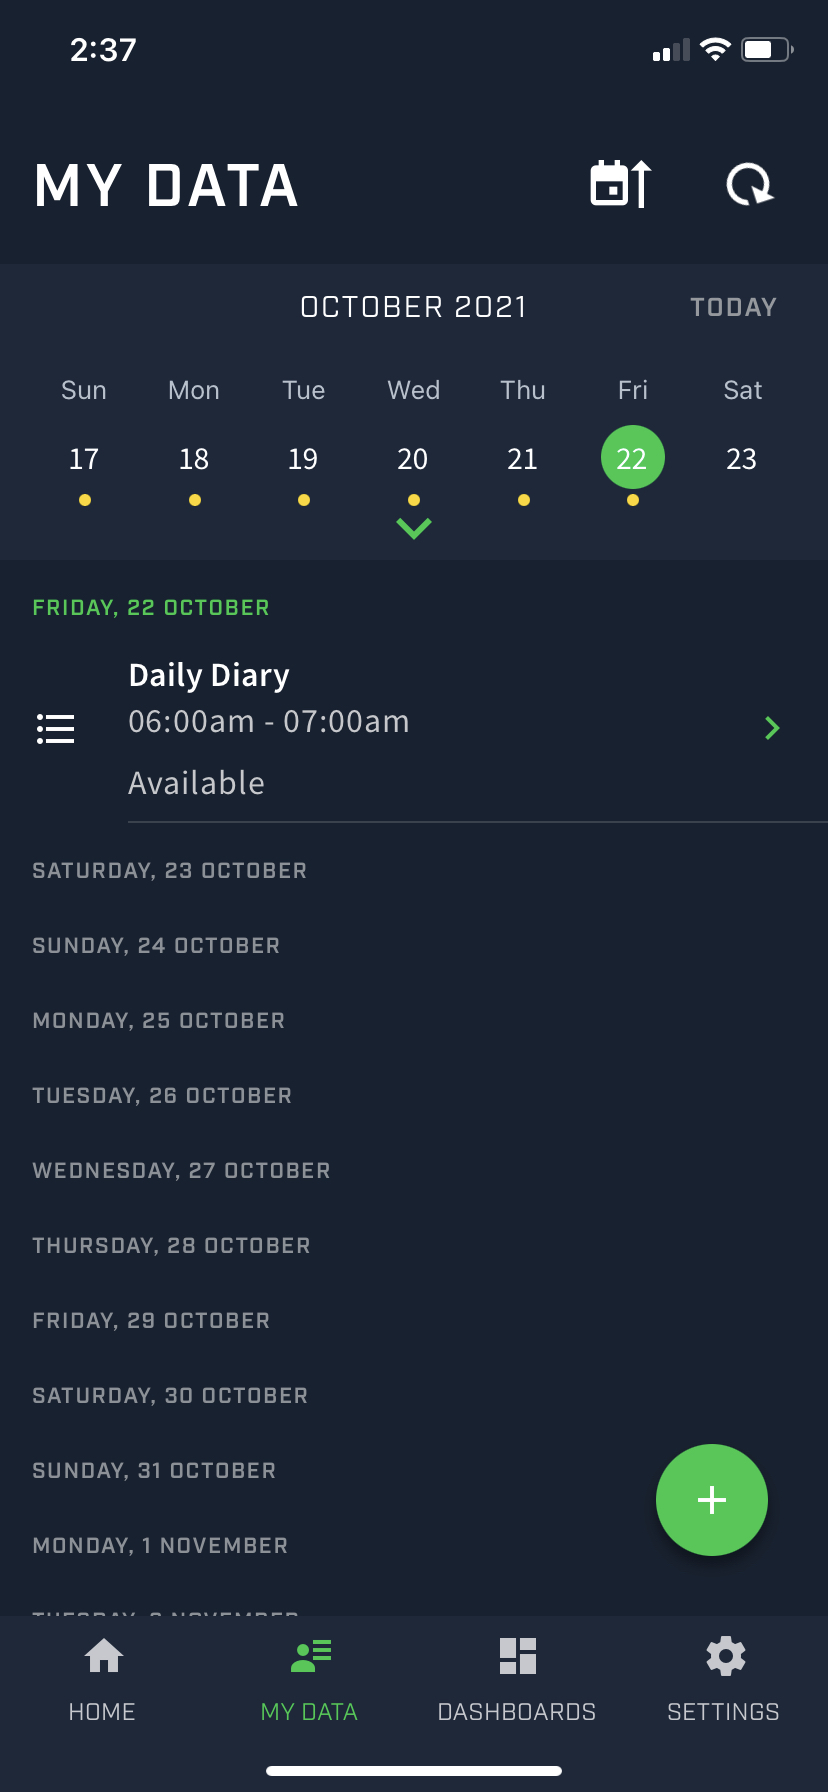 A screenshot of the My Data screen of the Athlete app. There is a record saved for the Daily Diary form on October 22. There is a green button with a plus icon inside.